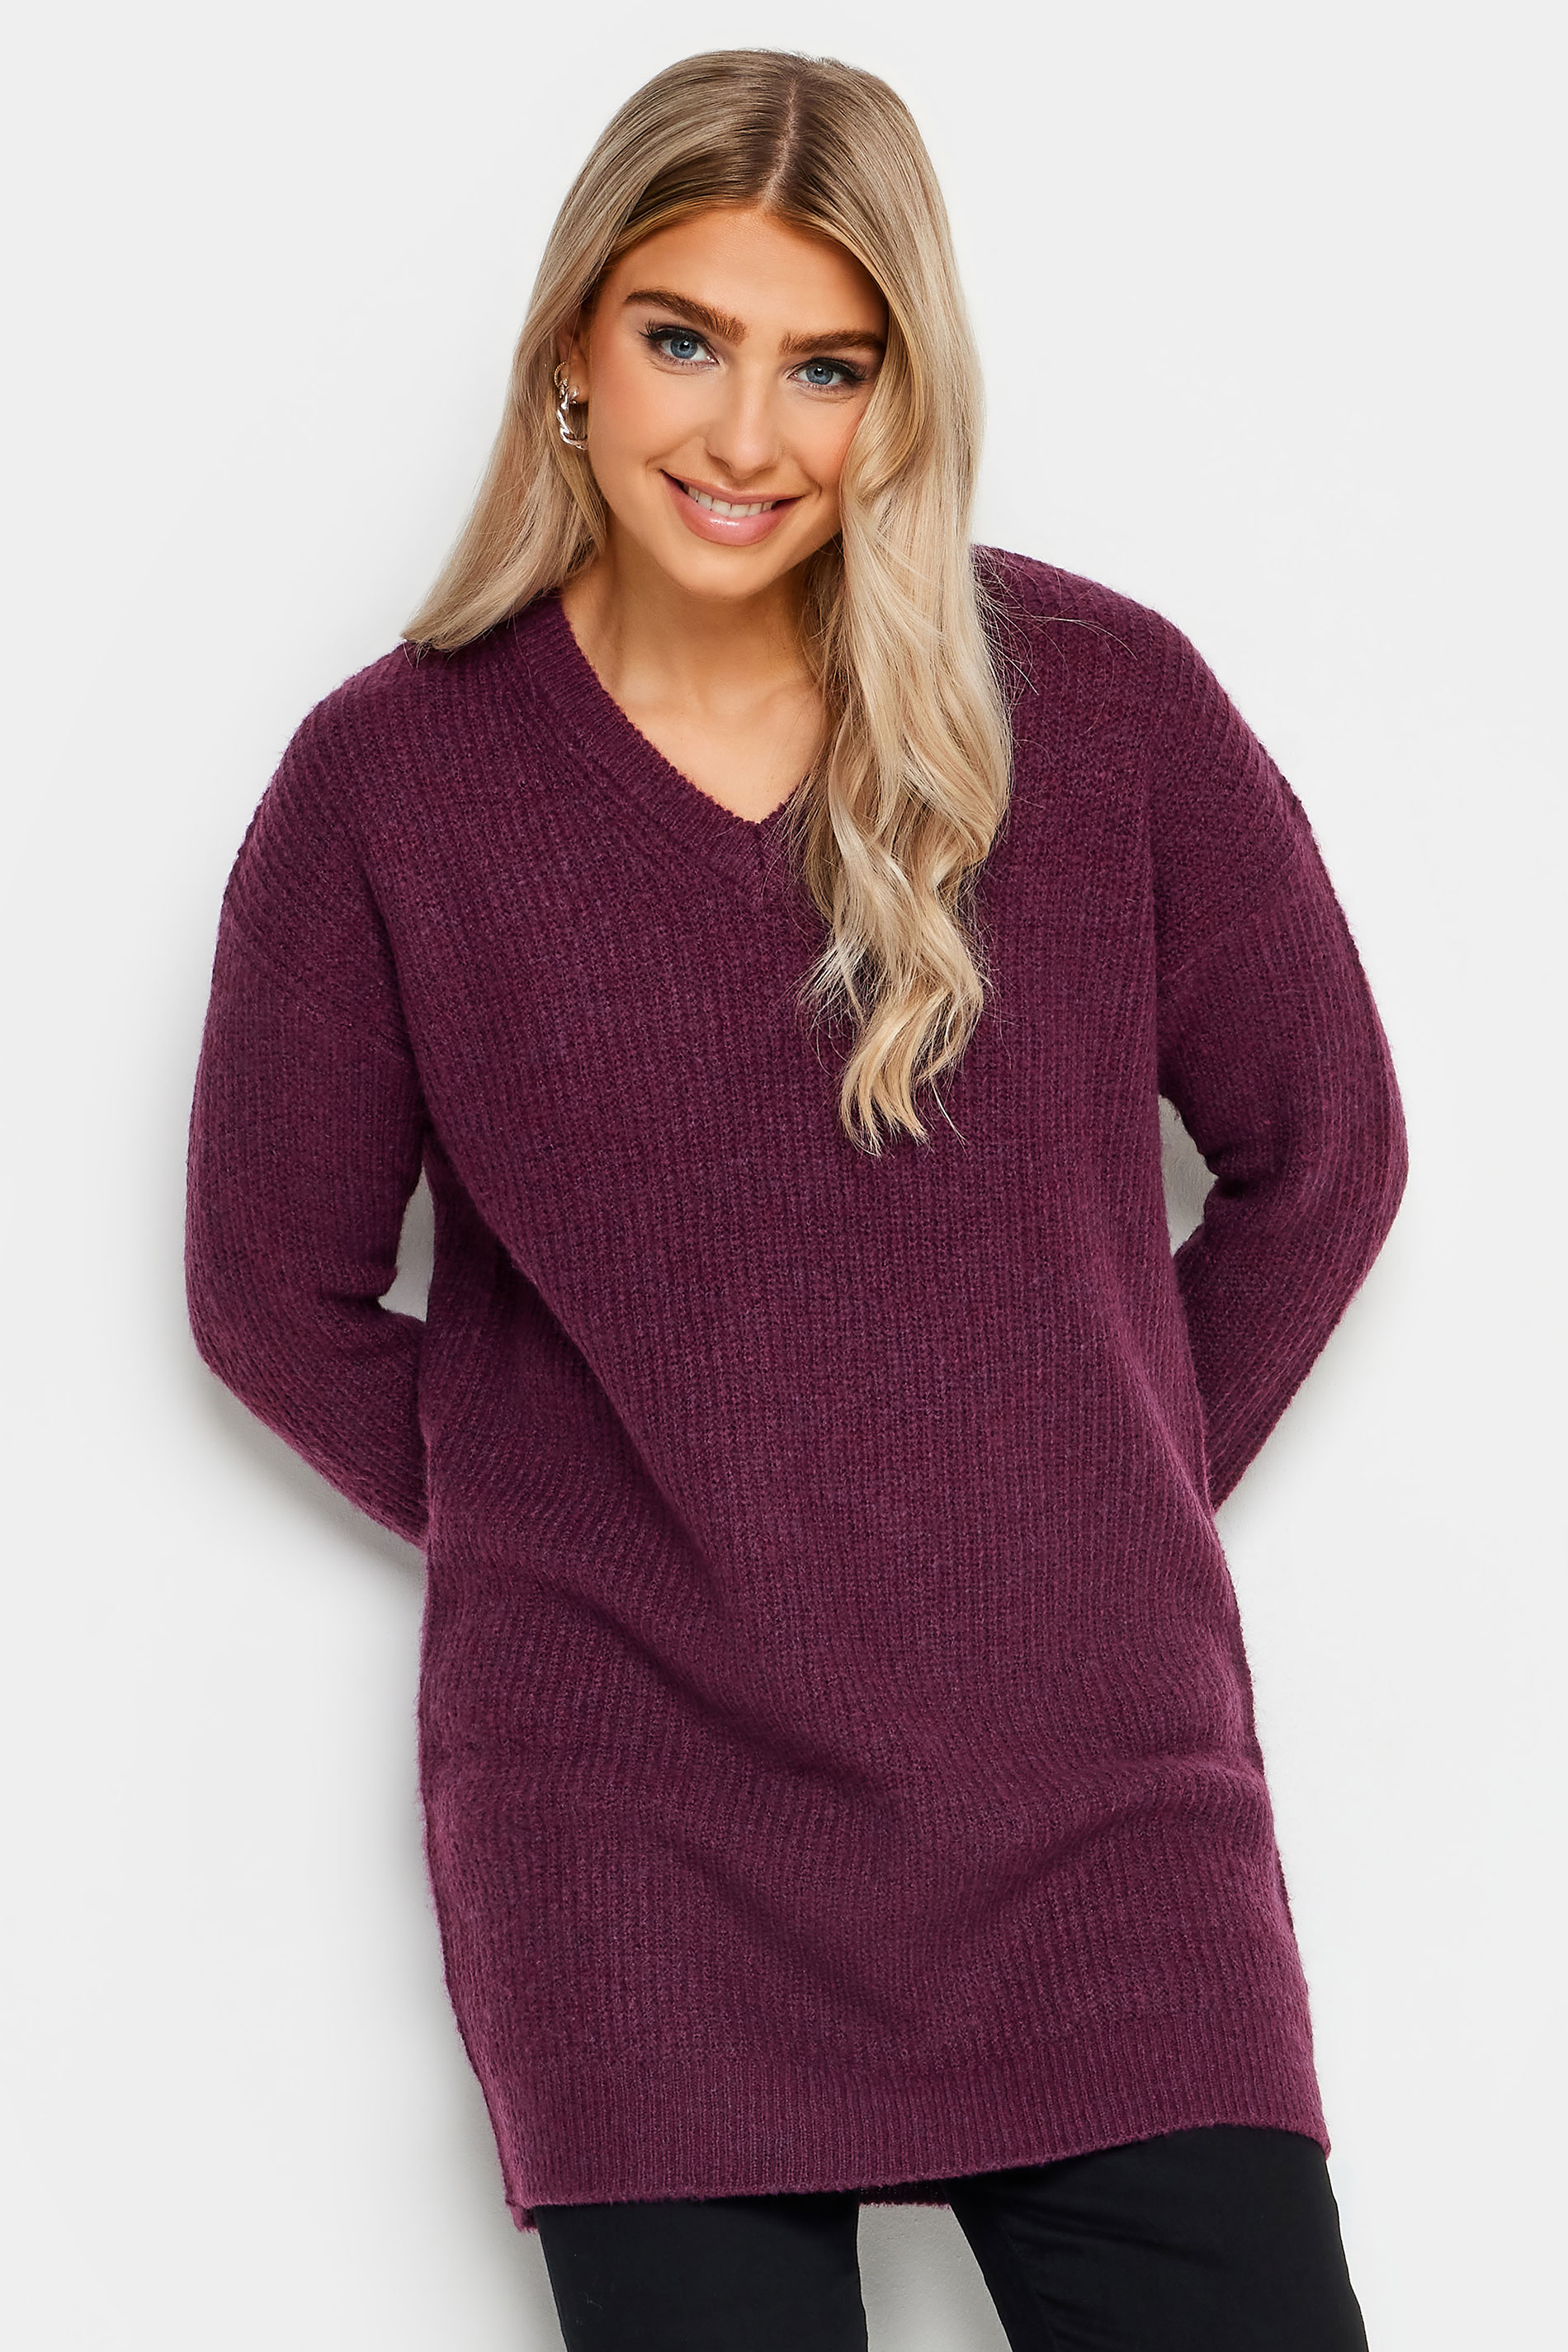 M&Co Berry Red Tunic Jumper Dress | M&Co